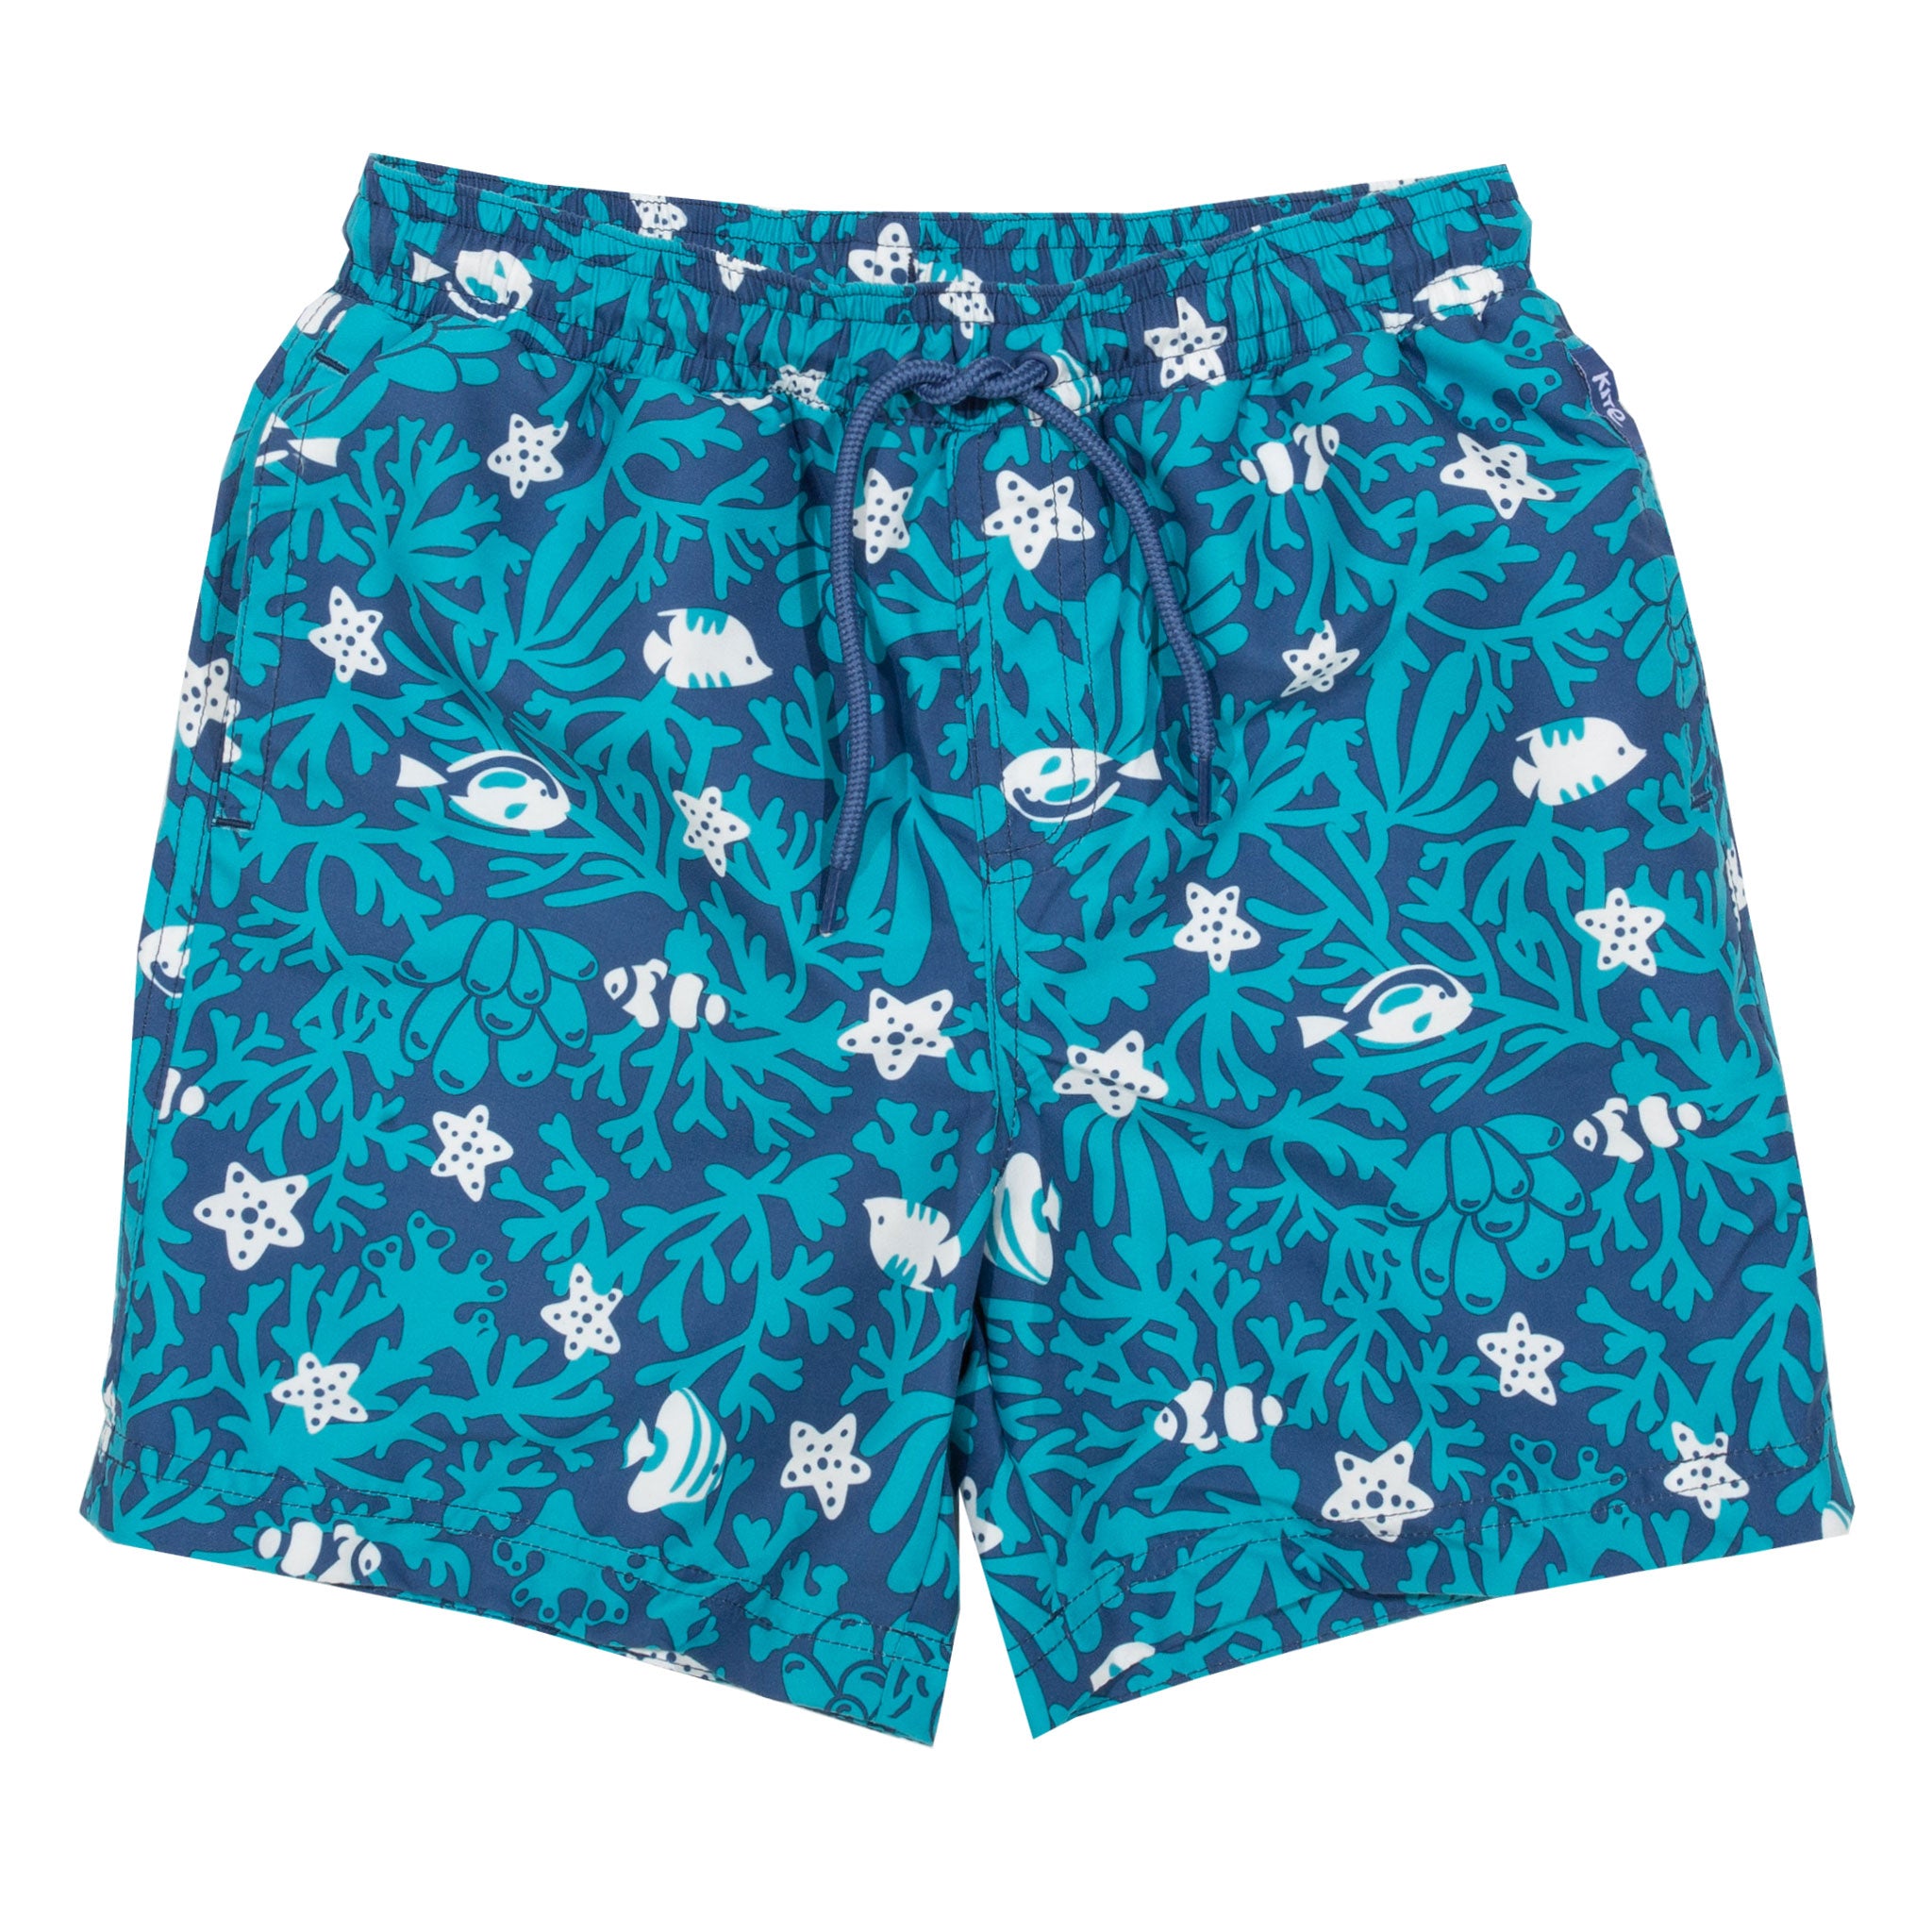 Kite Coral Reef Swim Shorts - Blue – The Thrifty Stork